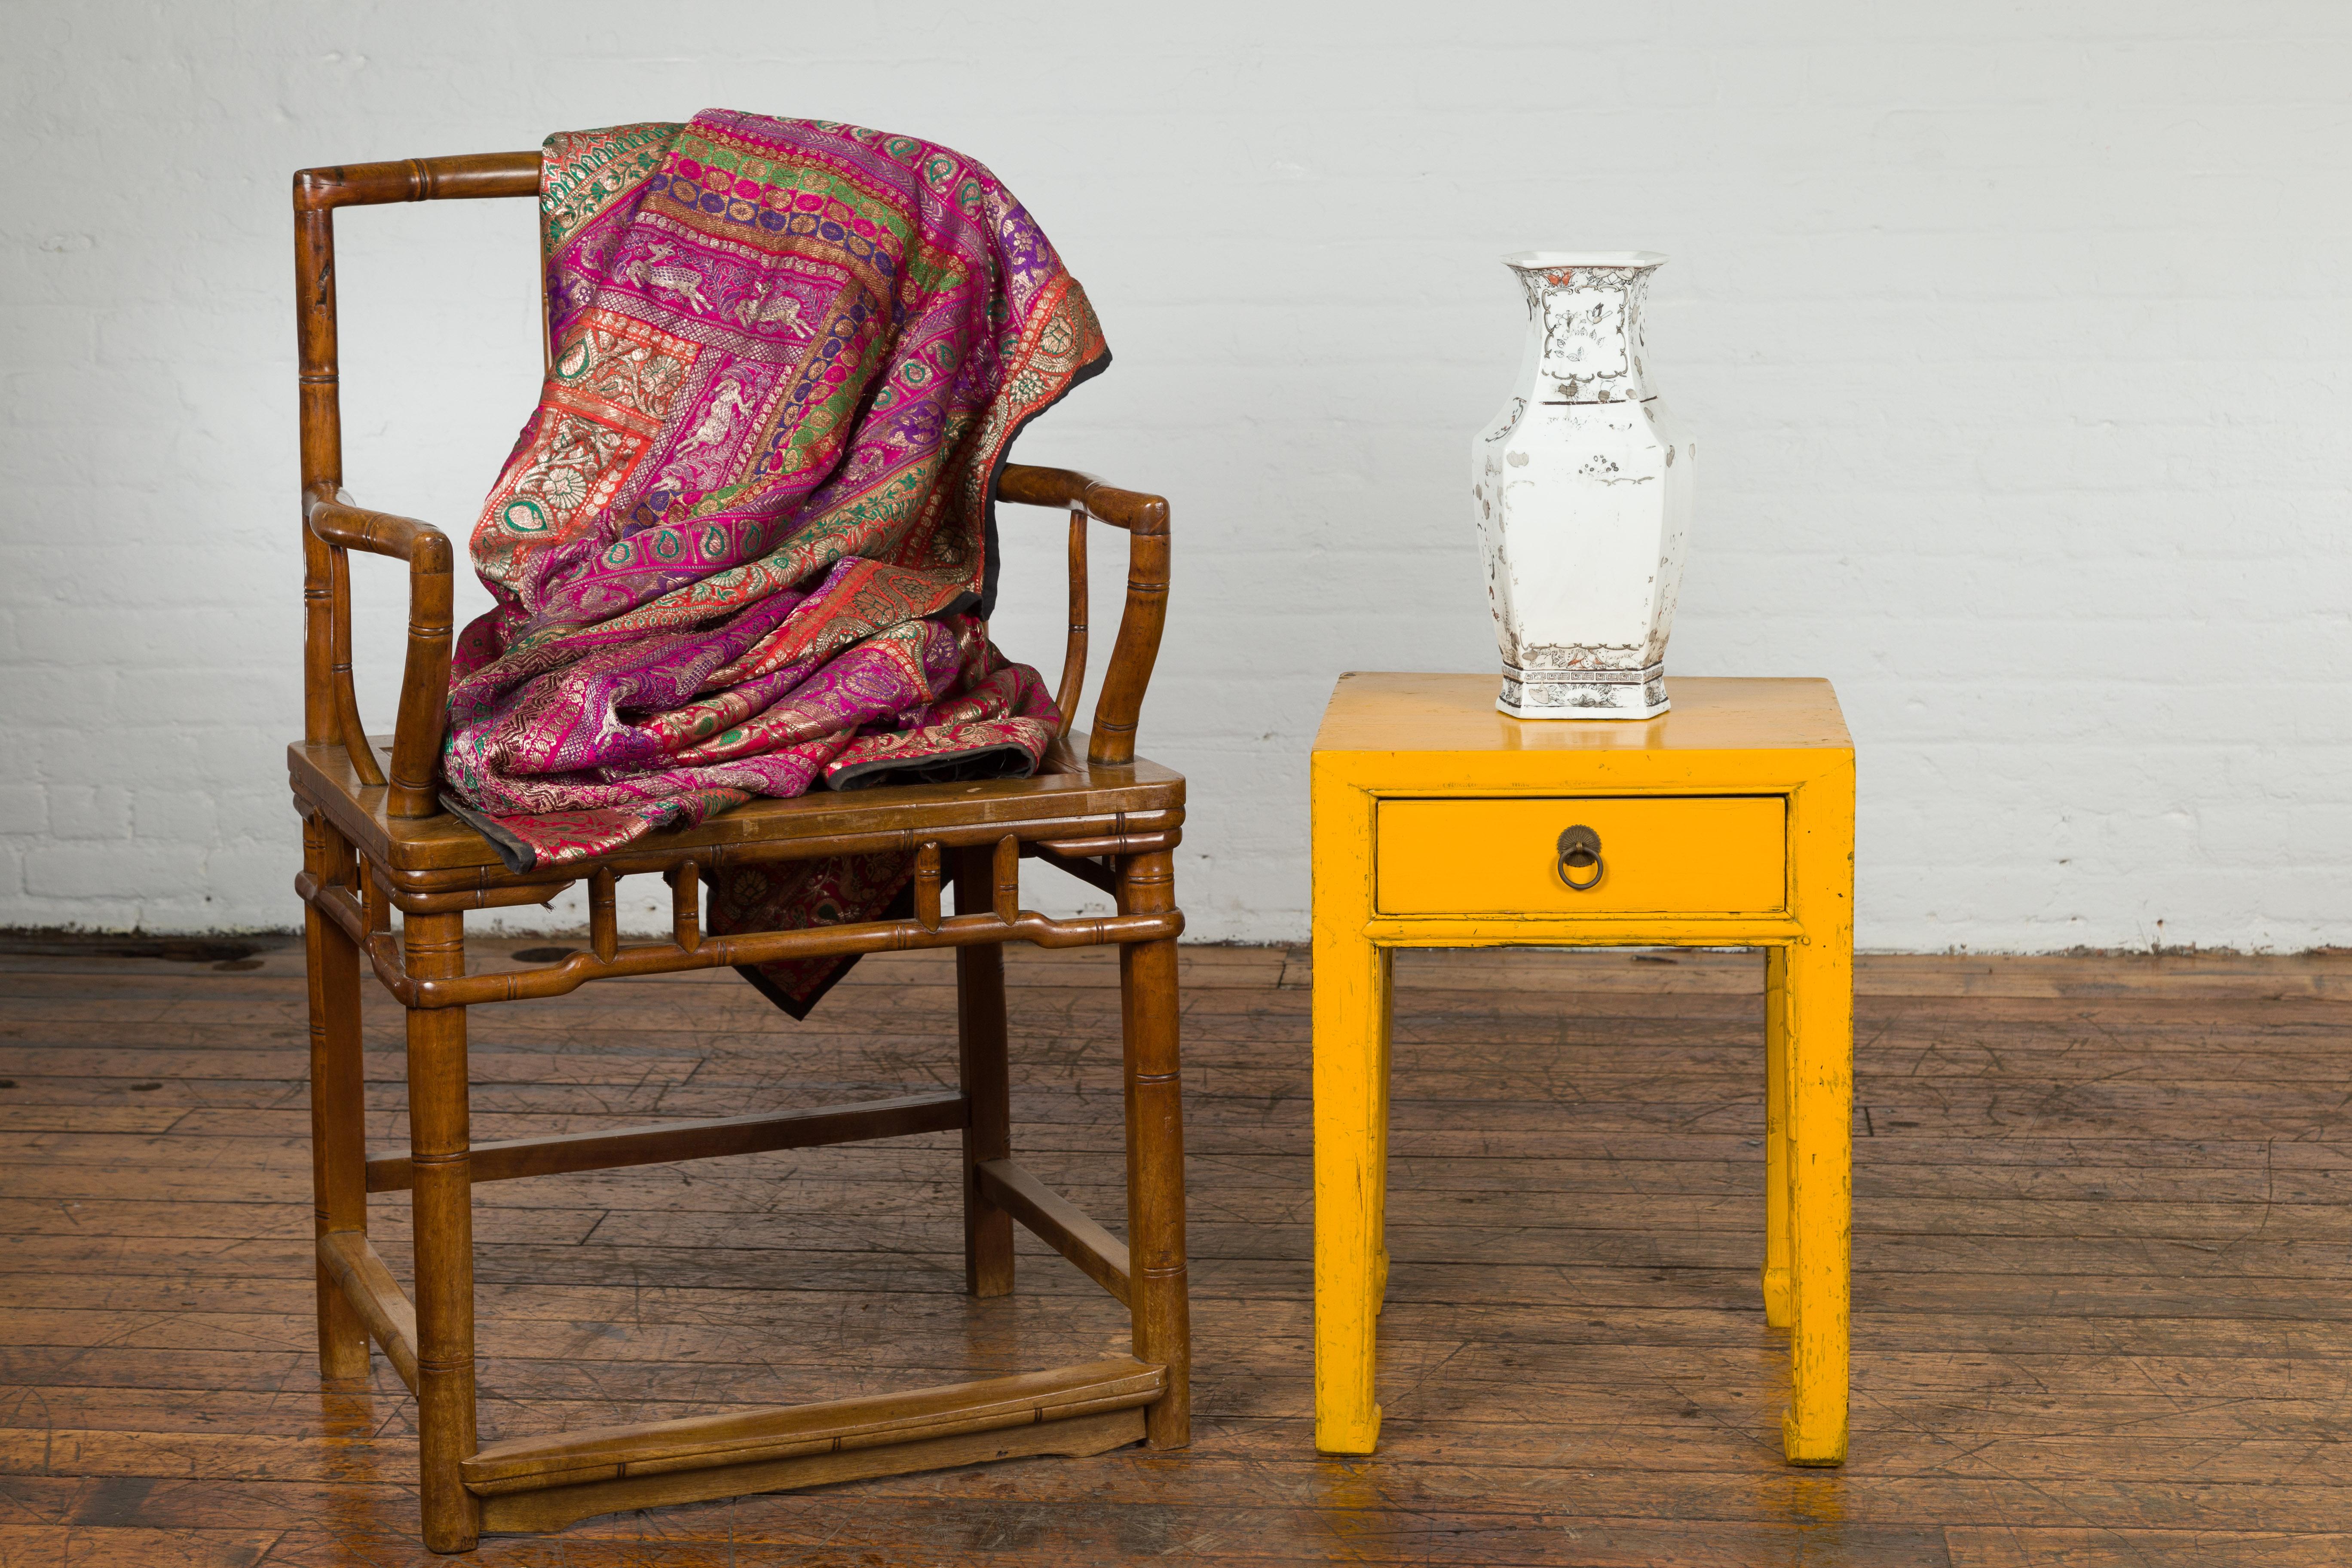 A small vintage Chinese side table from the mid 20th century, with yellow lacquer, distressed patina, single drawer, and horse hoof legs. Created in China during the mid century period, this small side table attracts our attention with its petite